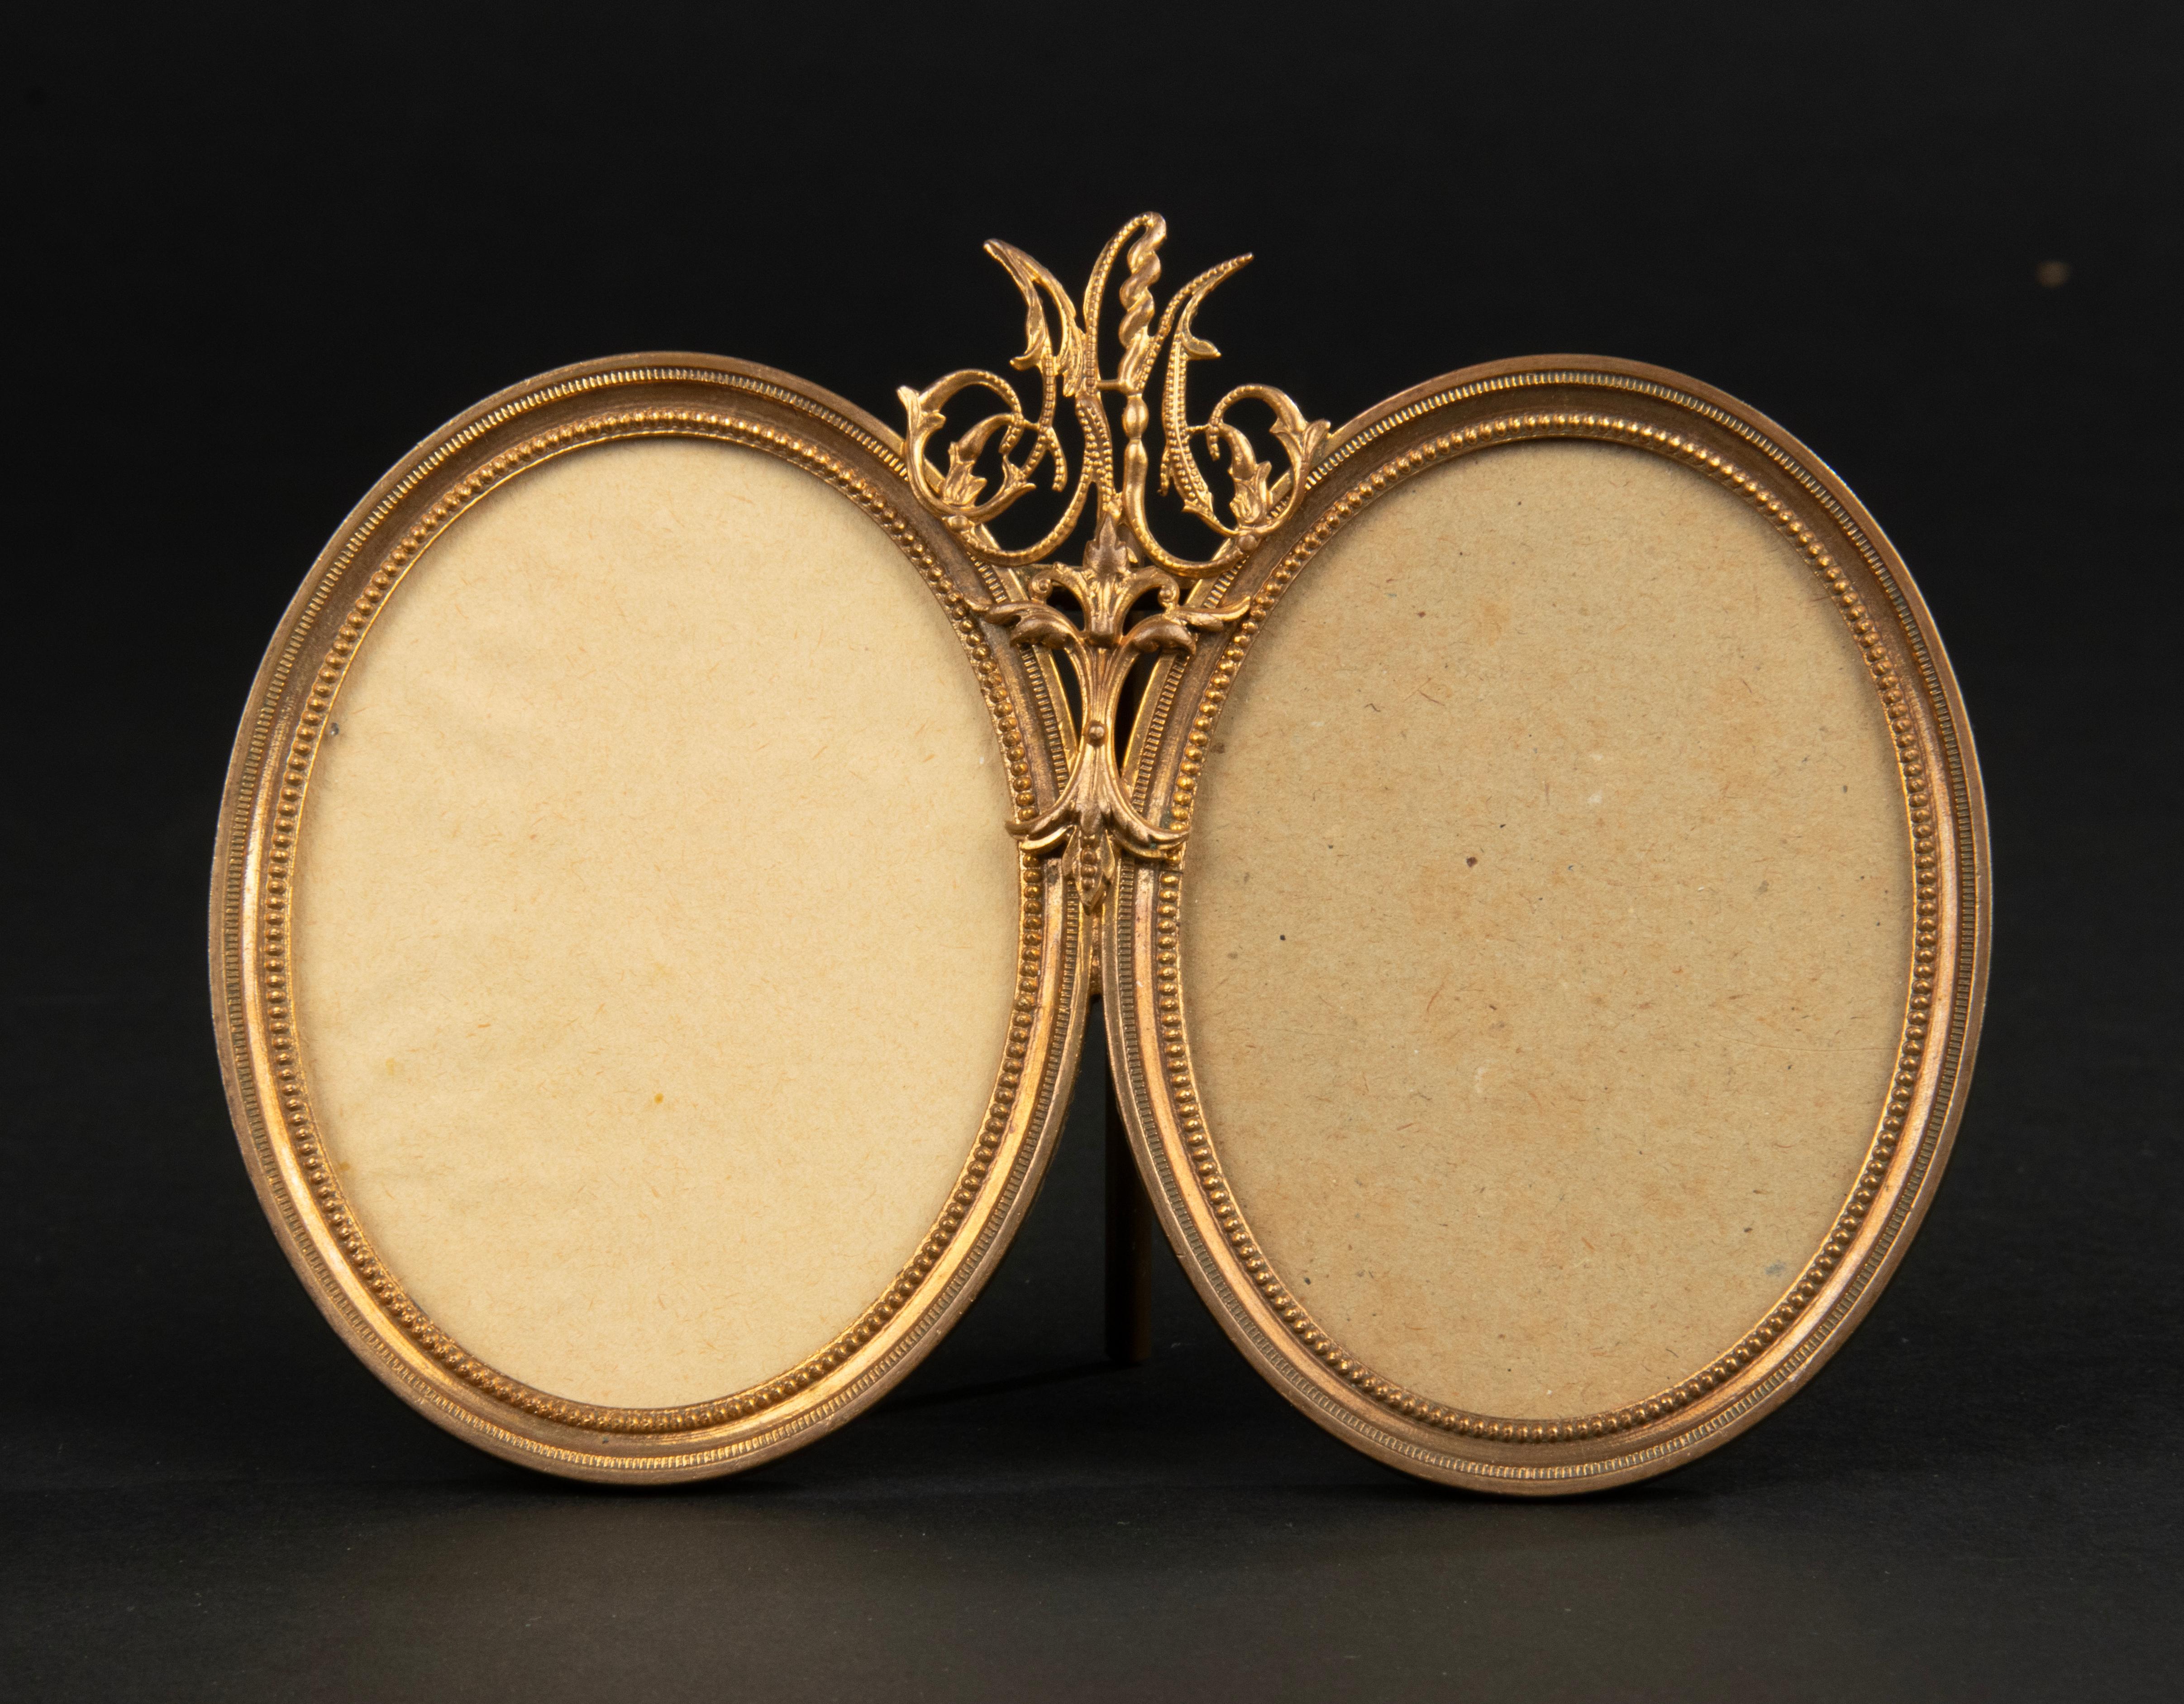 A refined double picture frame made of bronze, with a gilt ormolu finish. Central a finely monogram with the capitals L.M. These where probably the initials of a married couple. Inside the beaded rim are glass covers. Made in France, late Napoleon